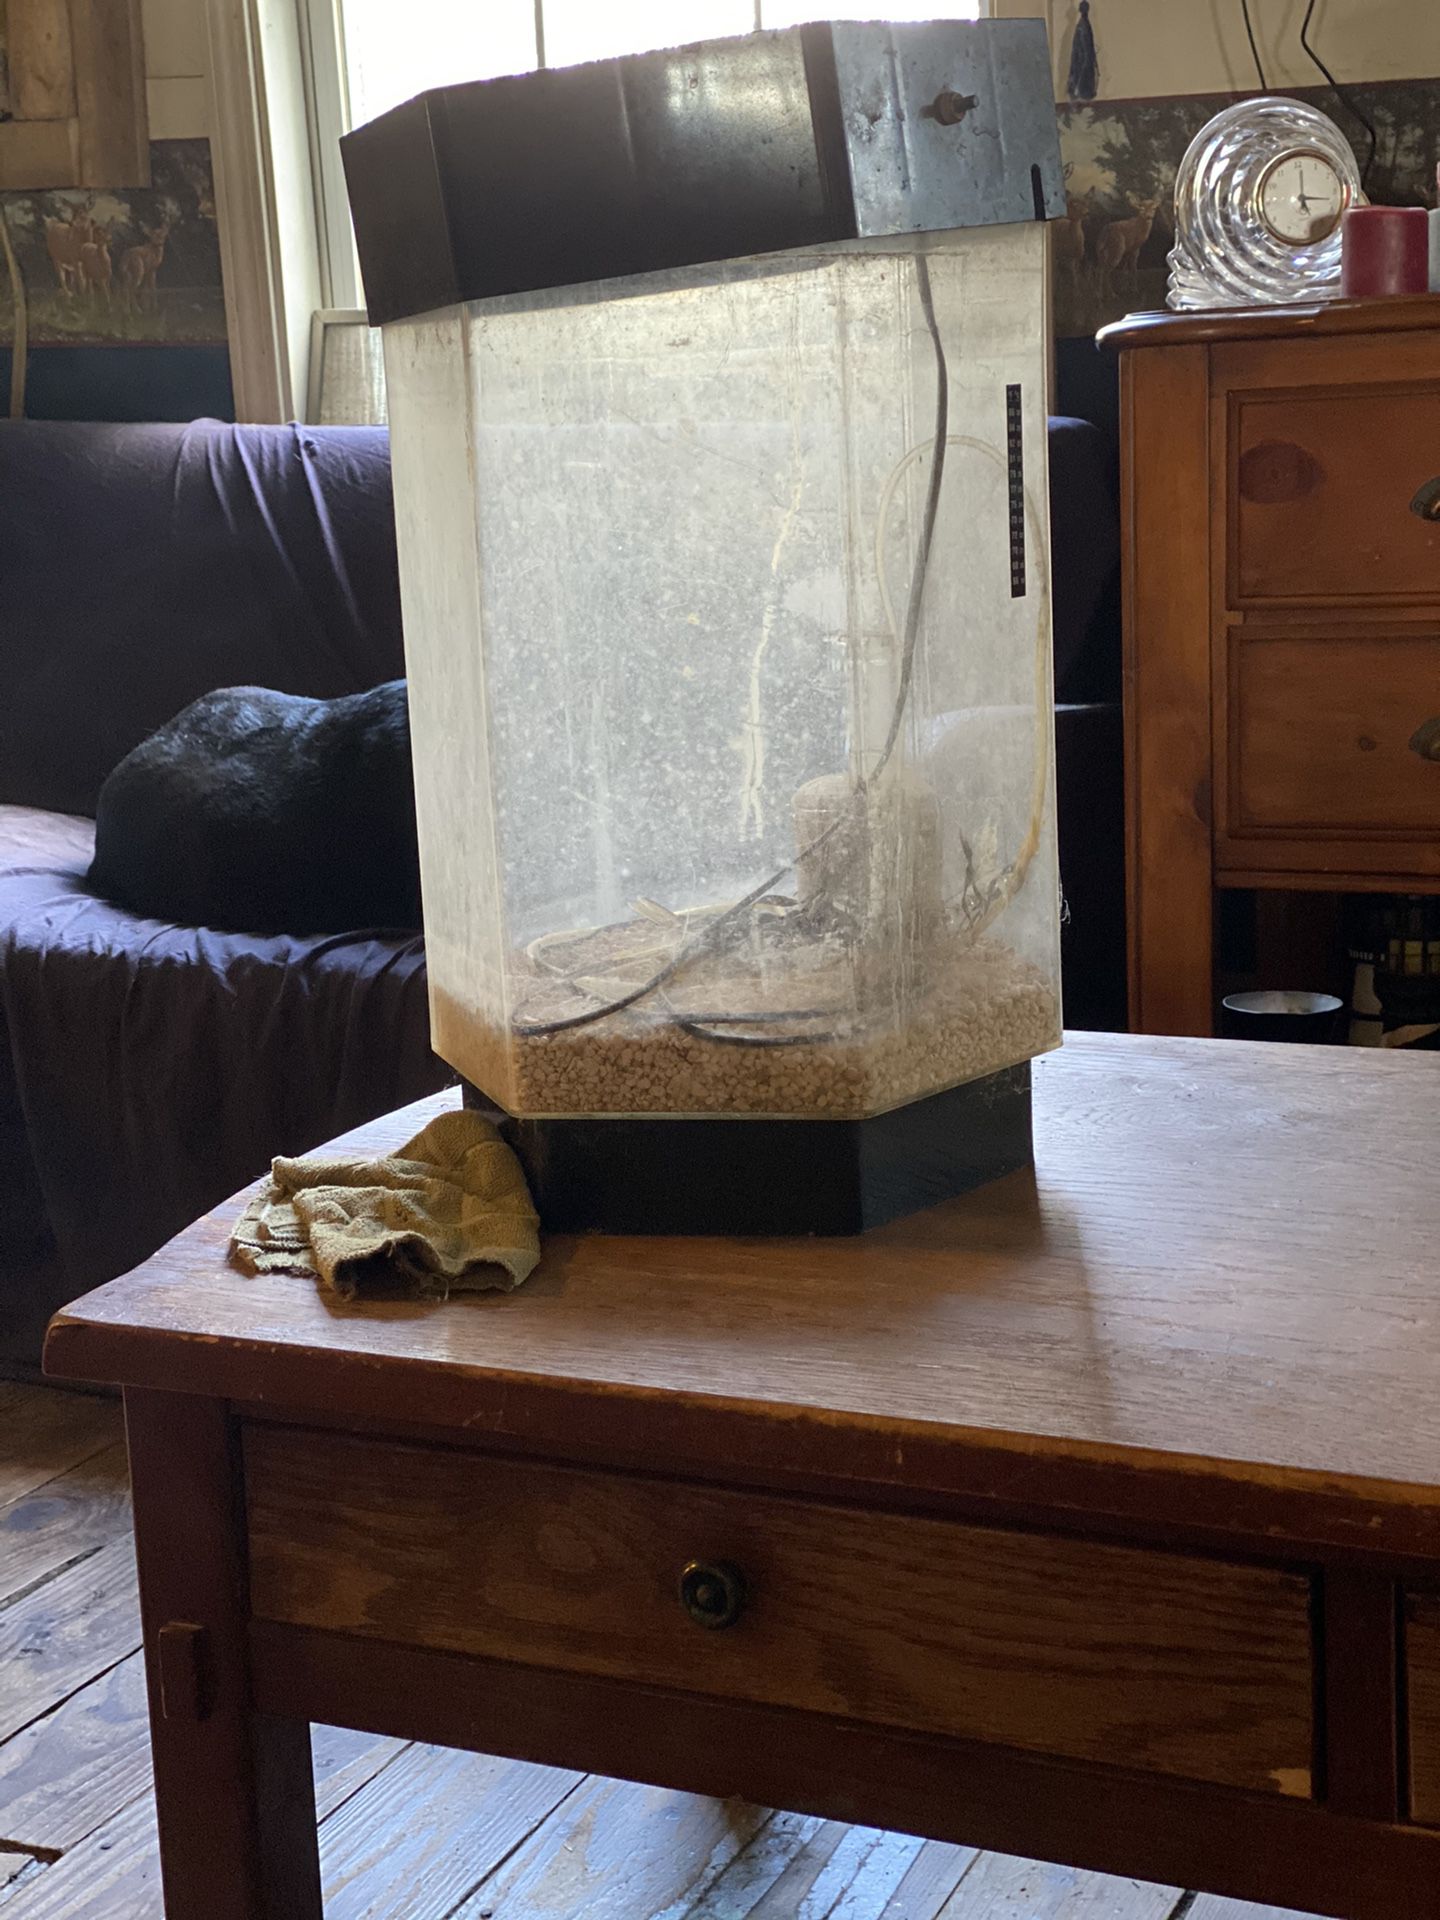 Have 2 octagon and 1 square fish tanks